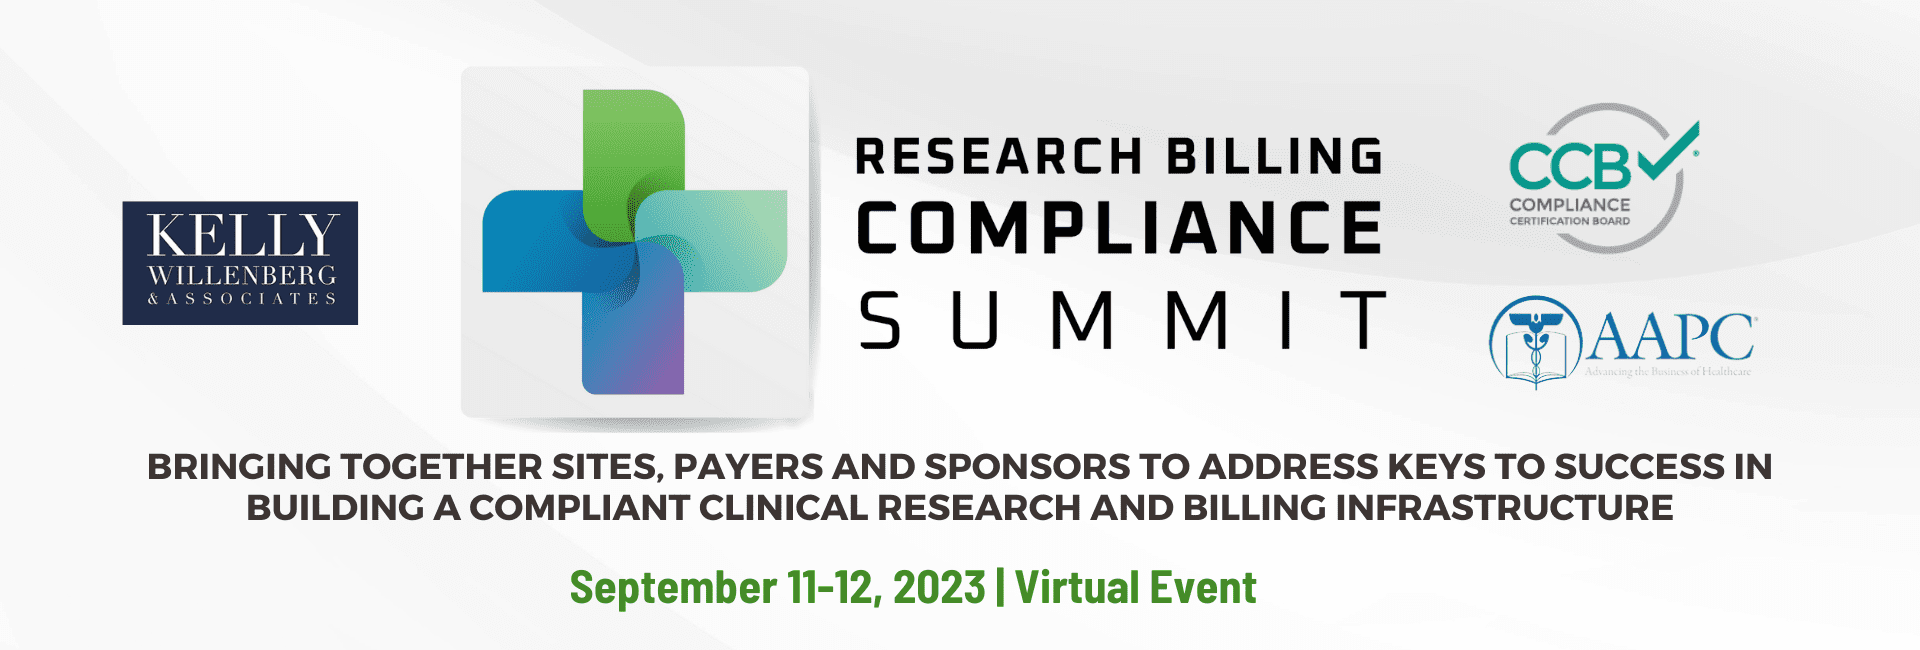 Hero Banner of Research Billing Compliance Summit Virtual Event